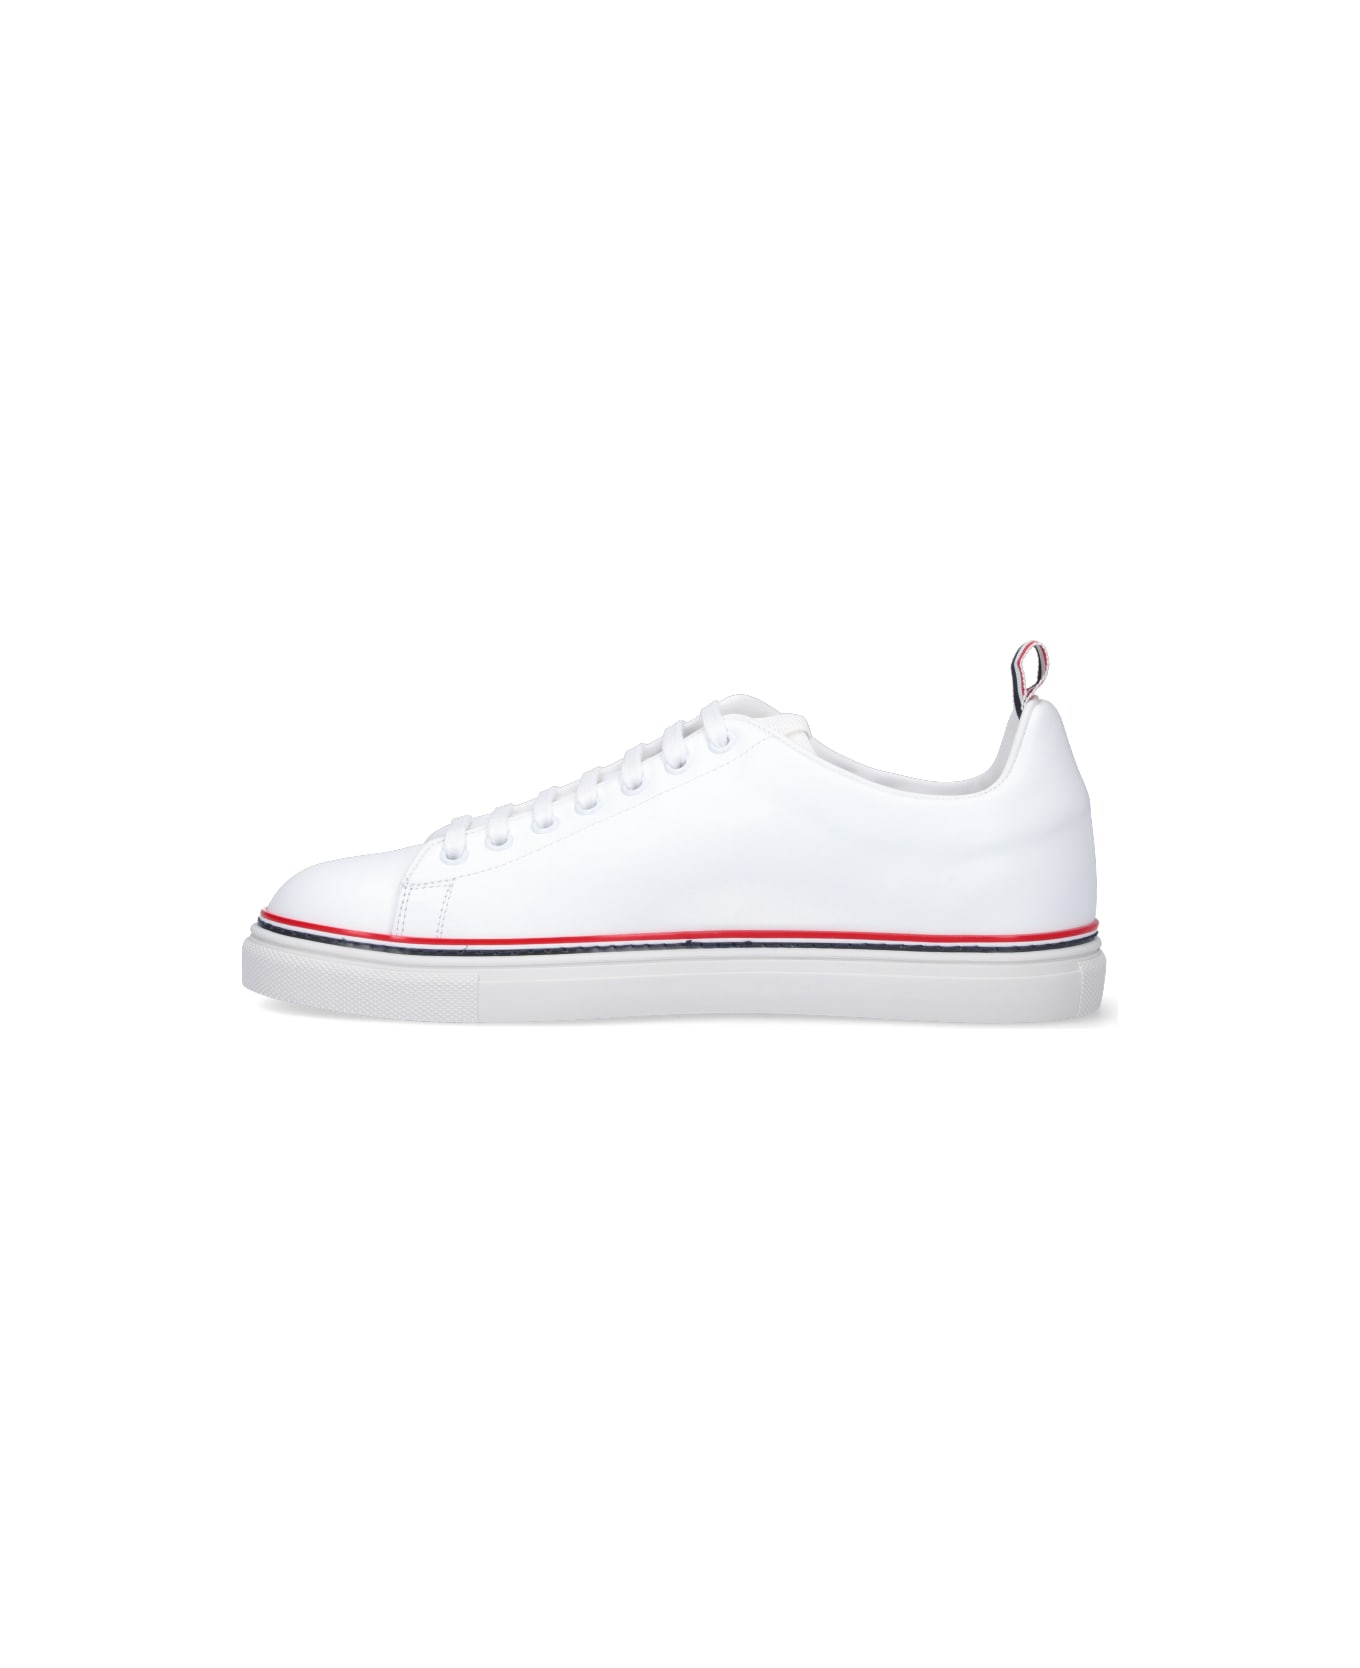 Thom Browne Calf Leather Tennis Shoes - White スニーカー